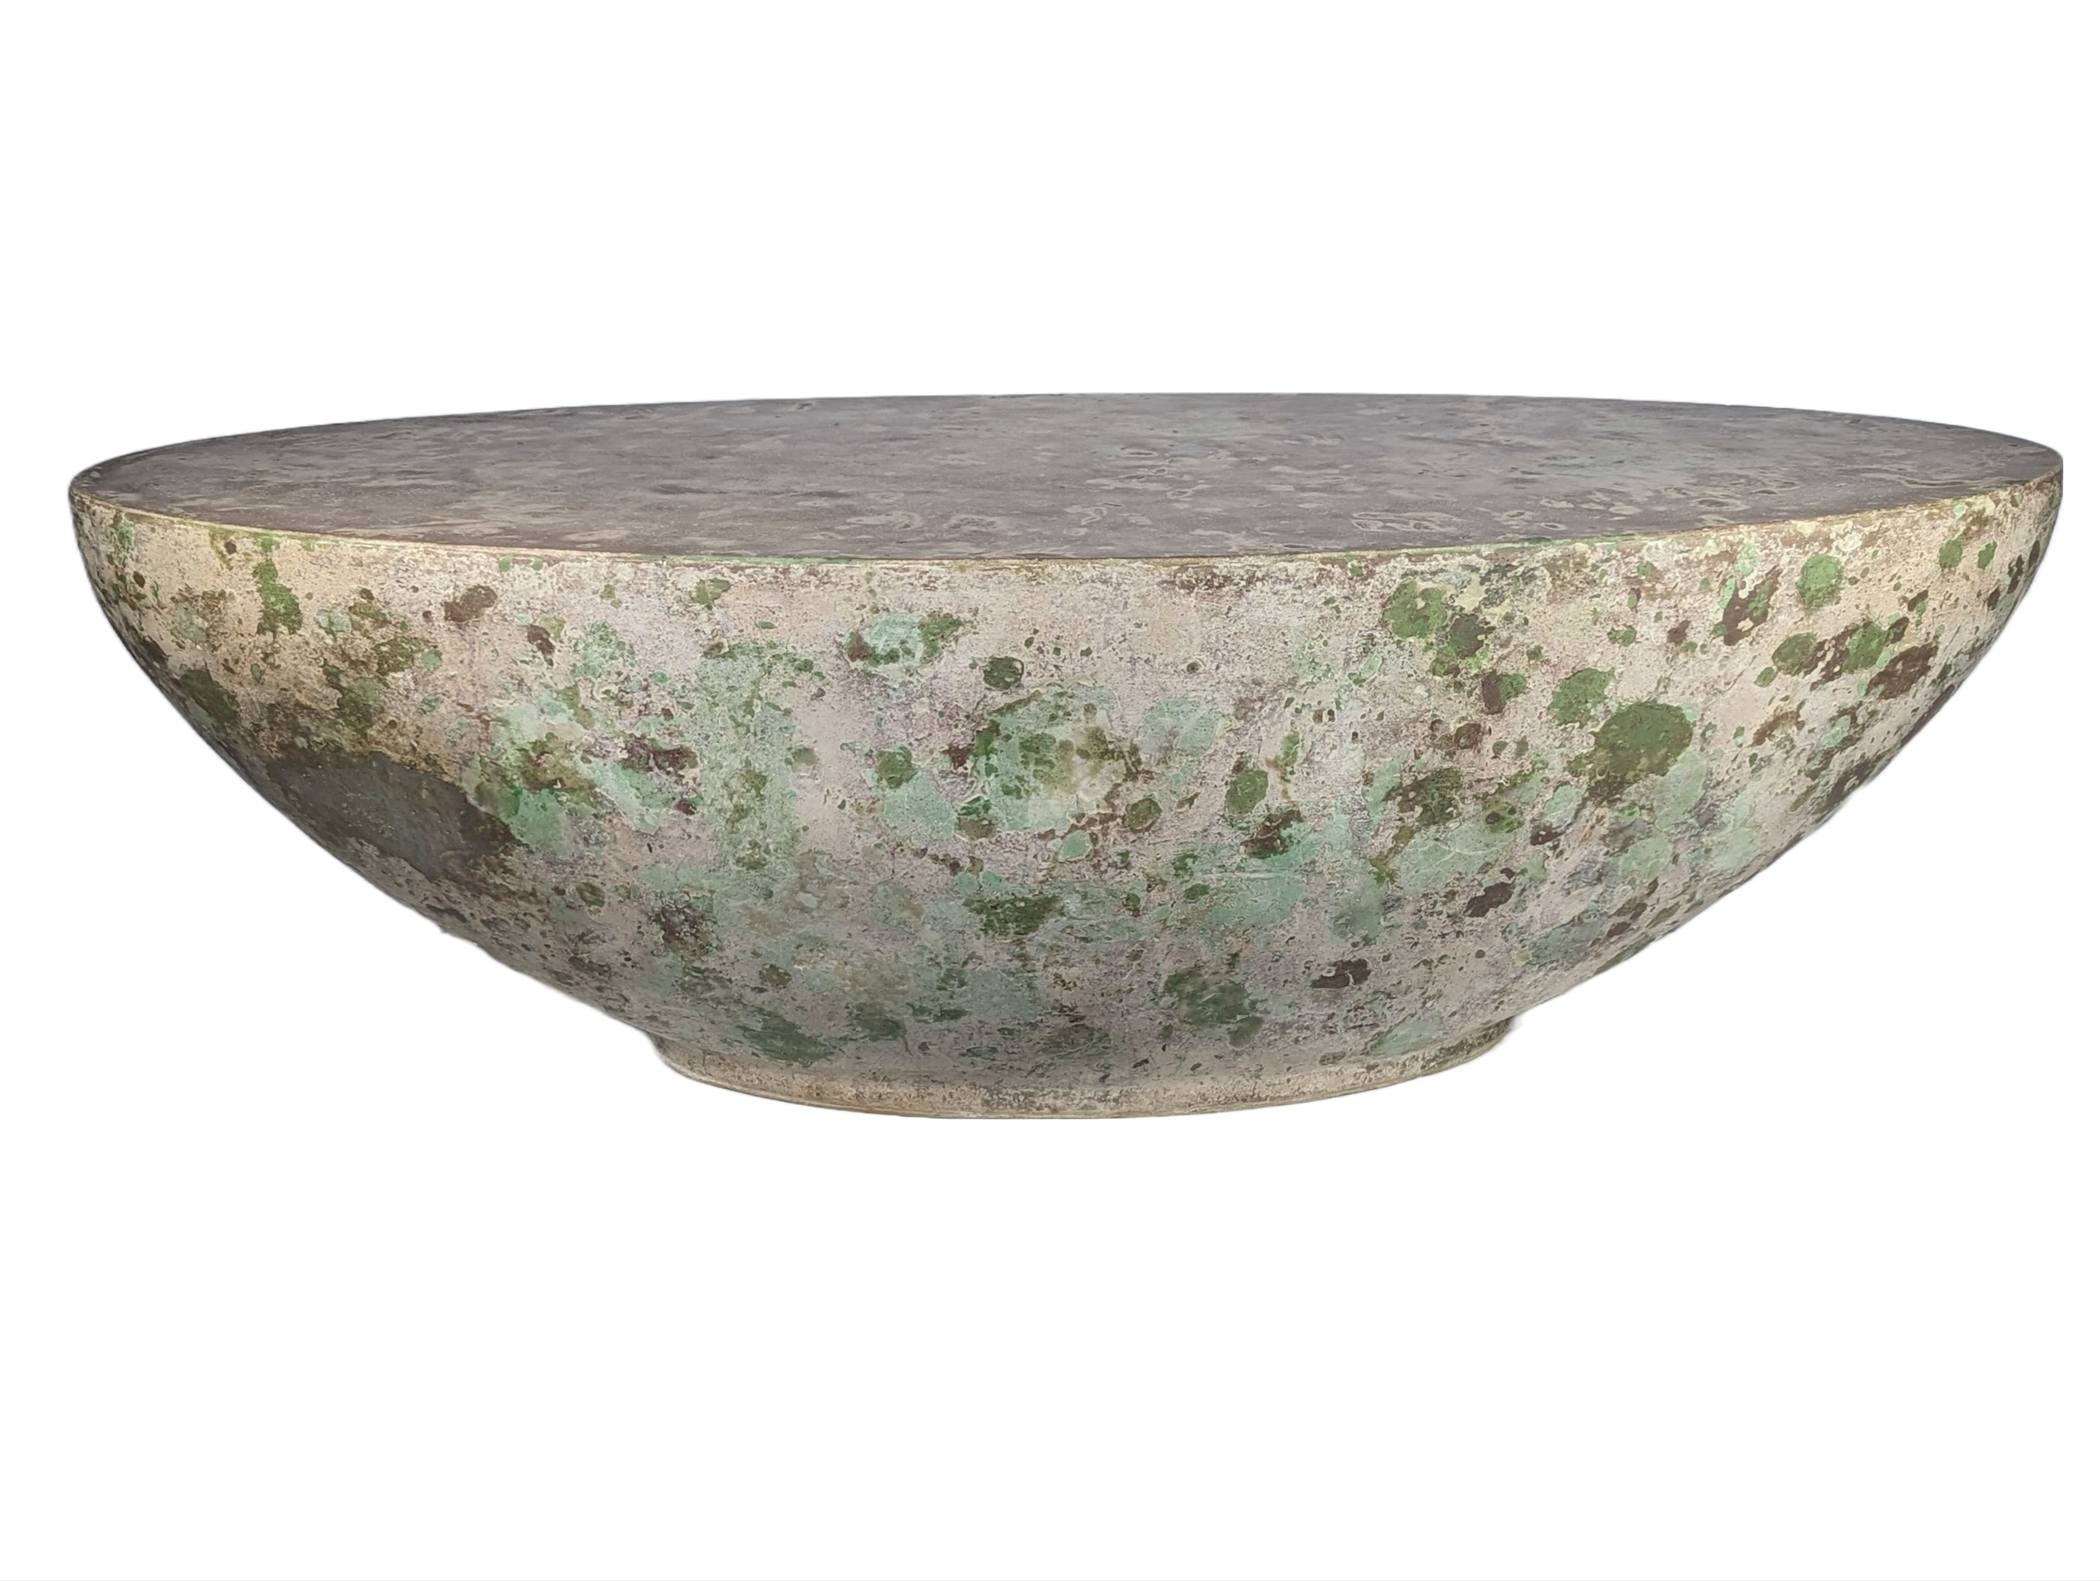 Organic oval concrete coffee table with greens and browns